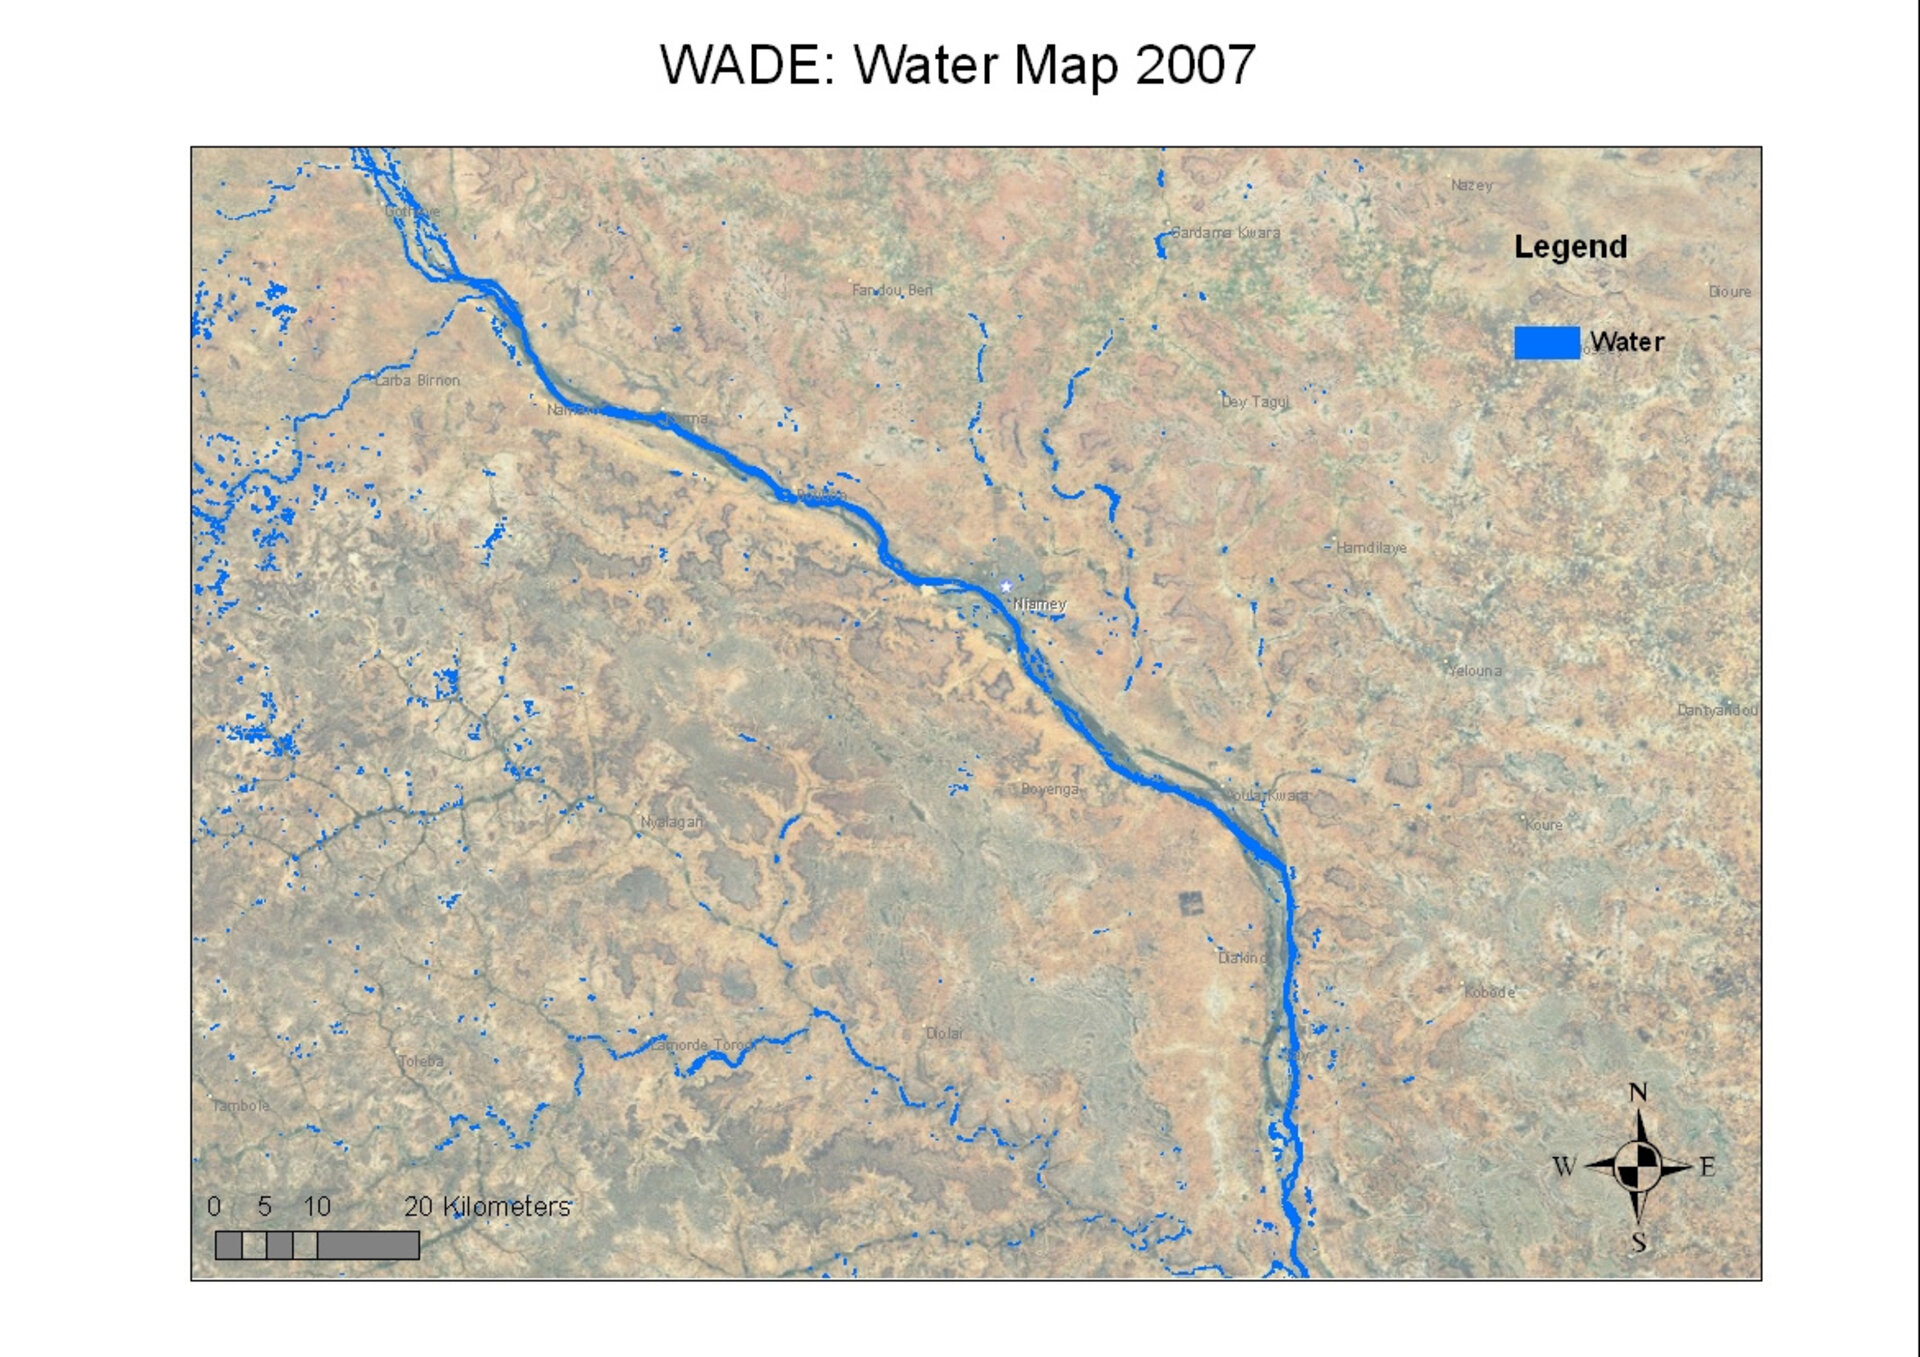 Water body map around the Niger River